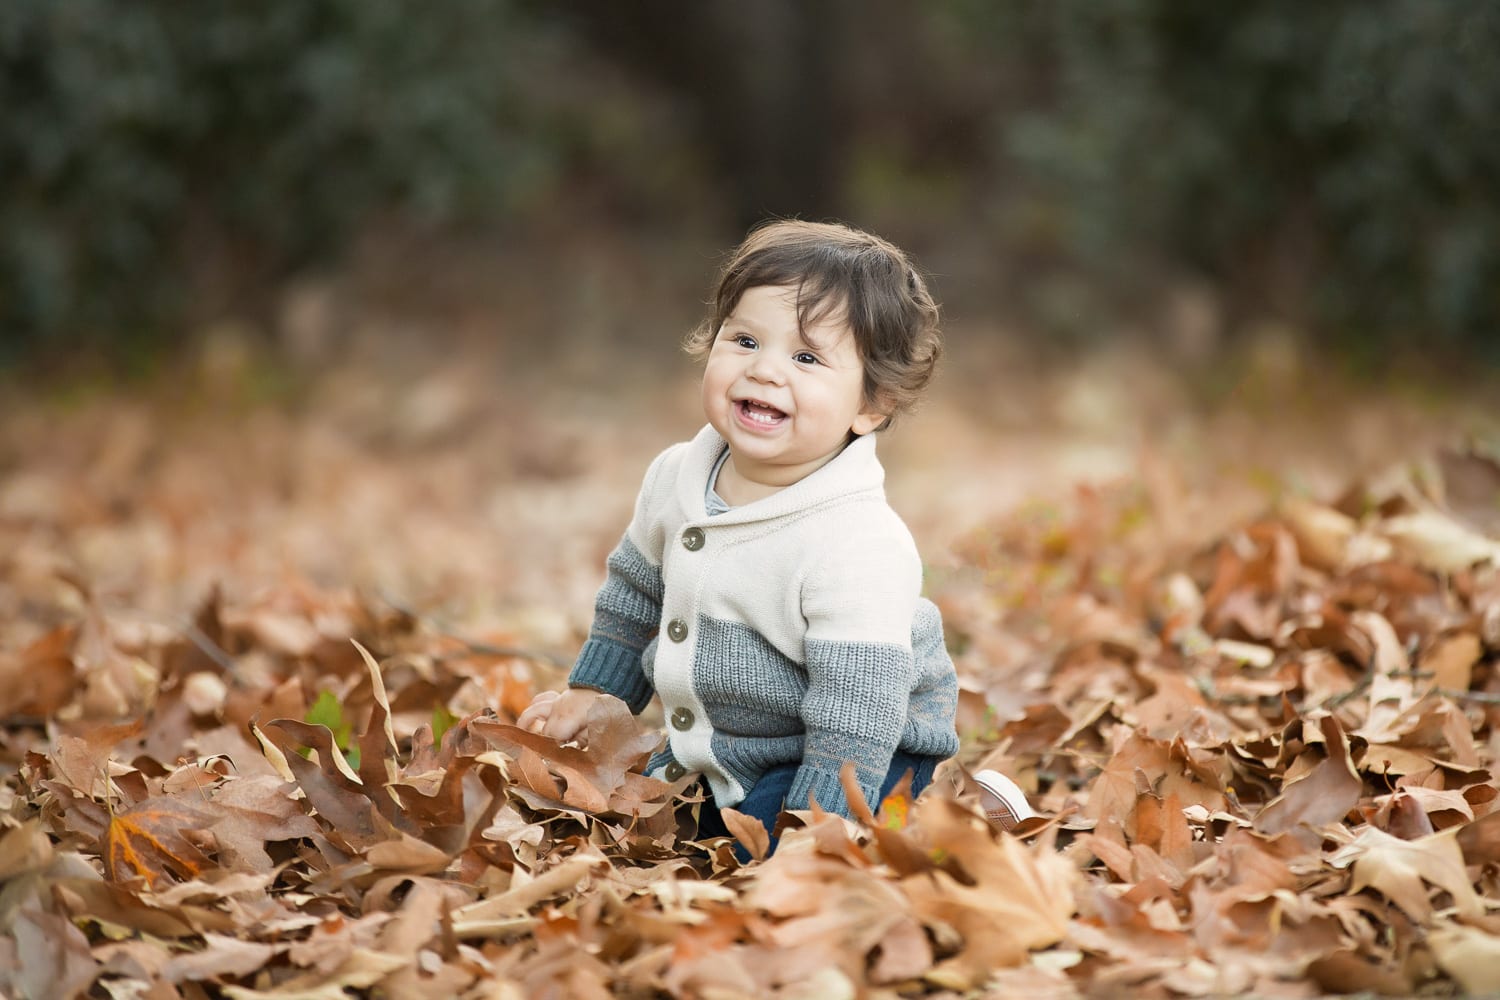 Portland_Baby_Photographer_Gretchen_Barros_Photography_One_Year_Fall_Leaves